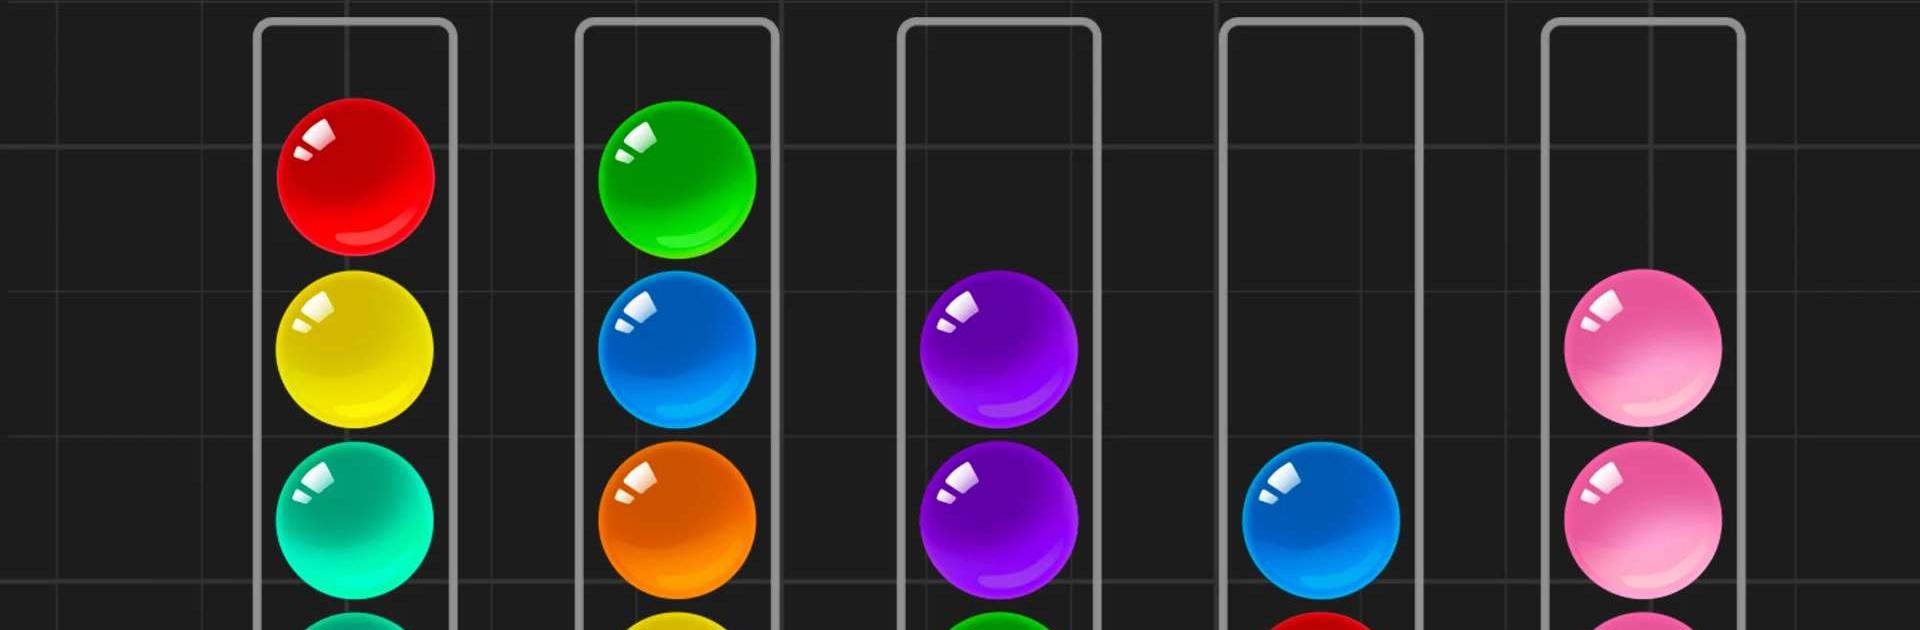 Play Ball Sort Puzzle - Color Game Online